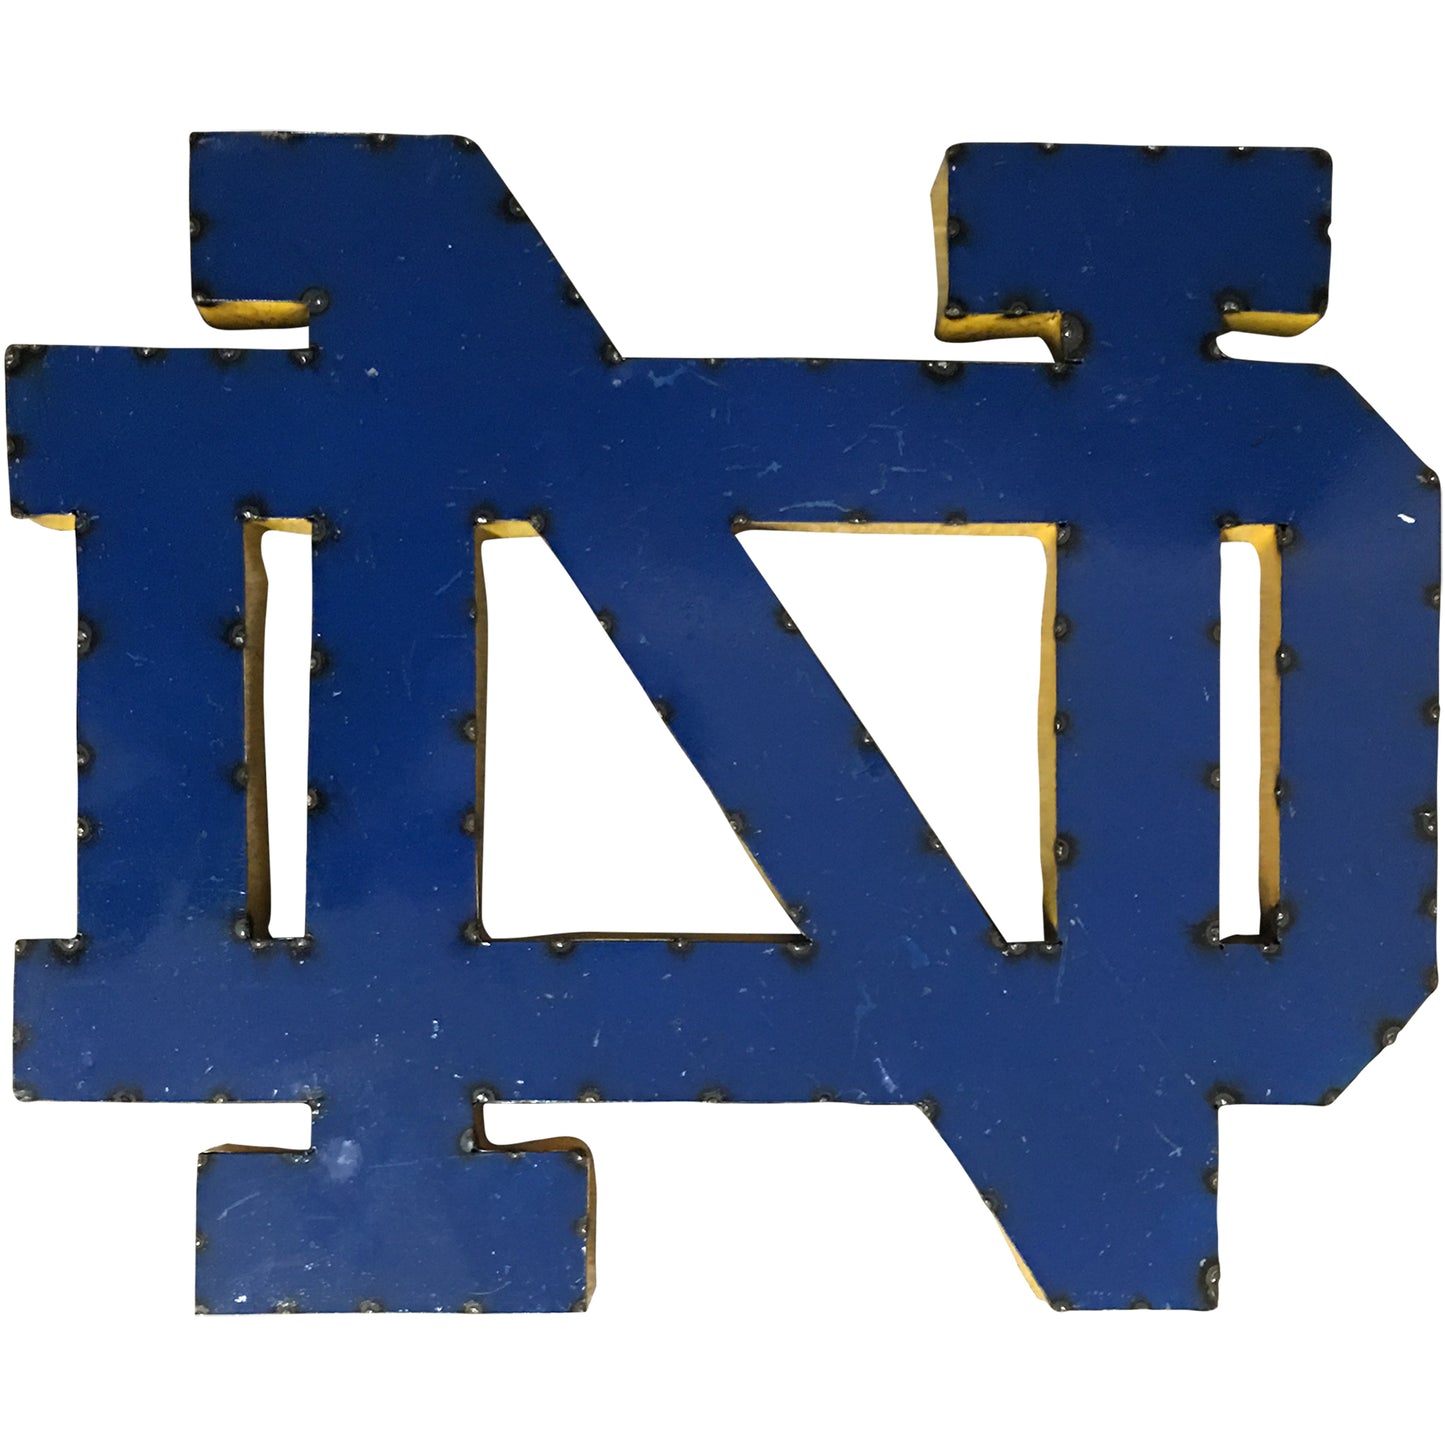 Notre Dame Classic Logo Recycled Metal Wall Decor